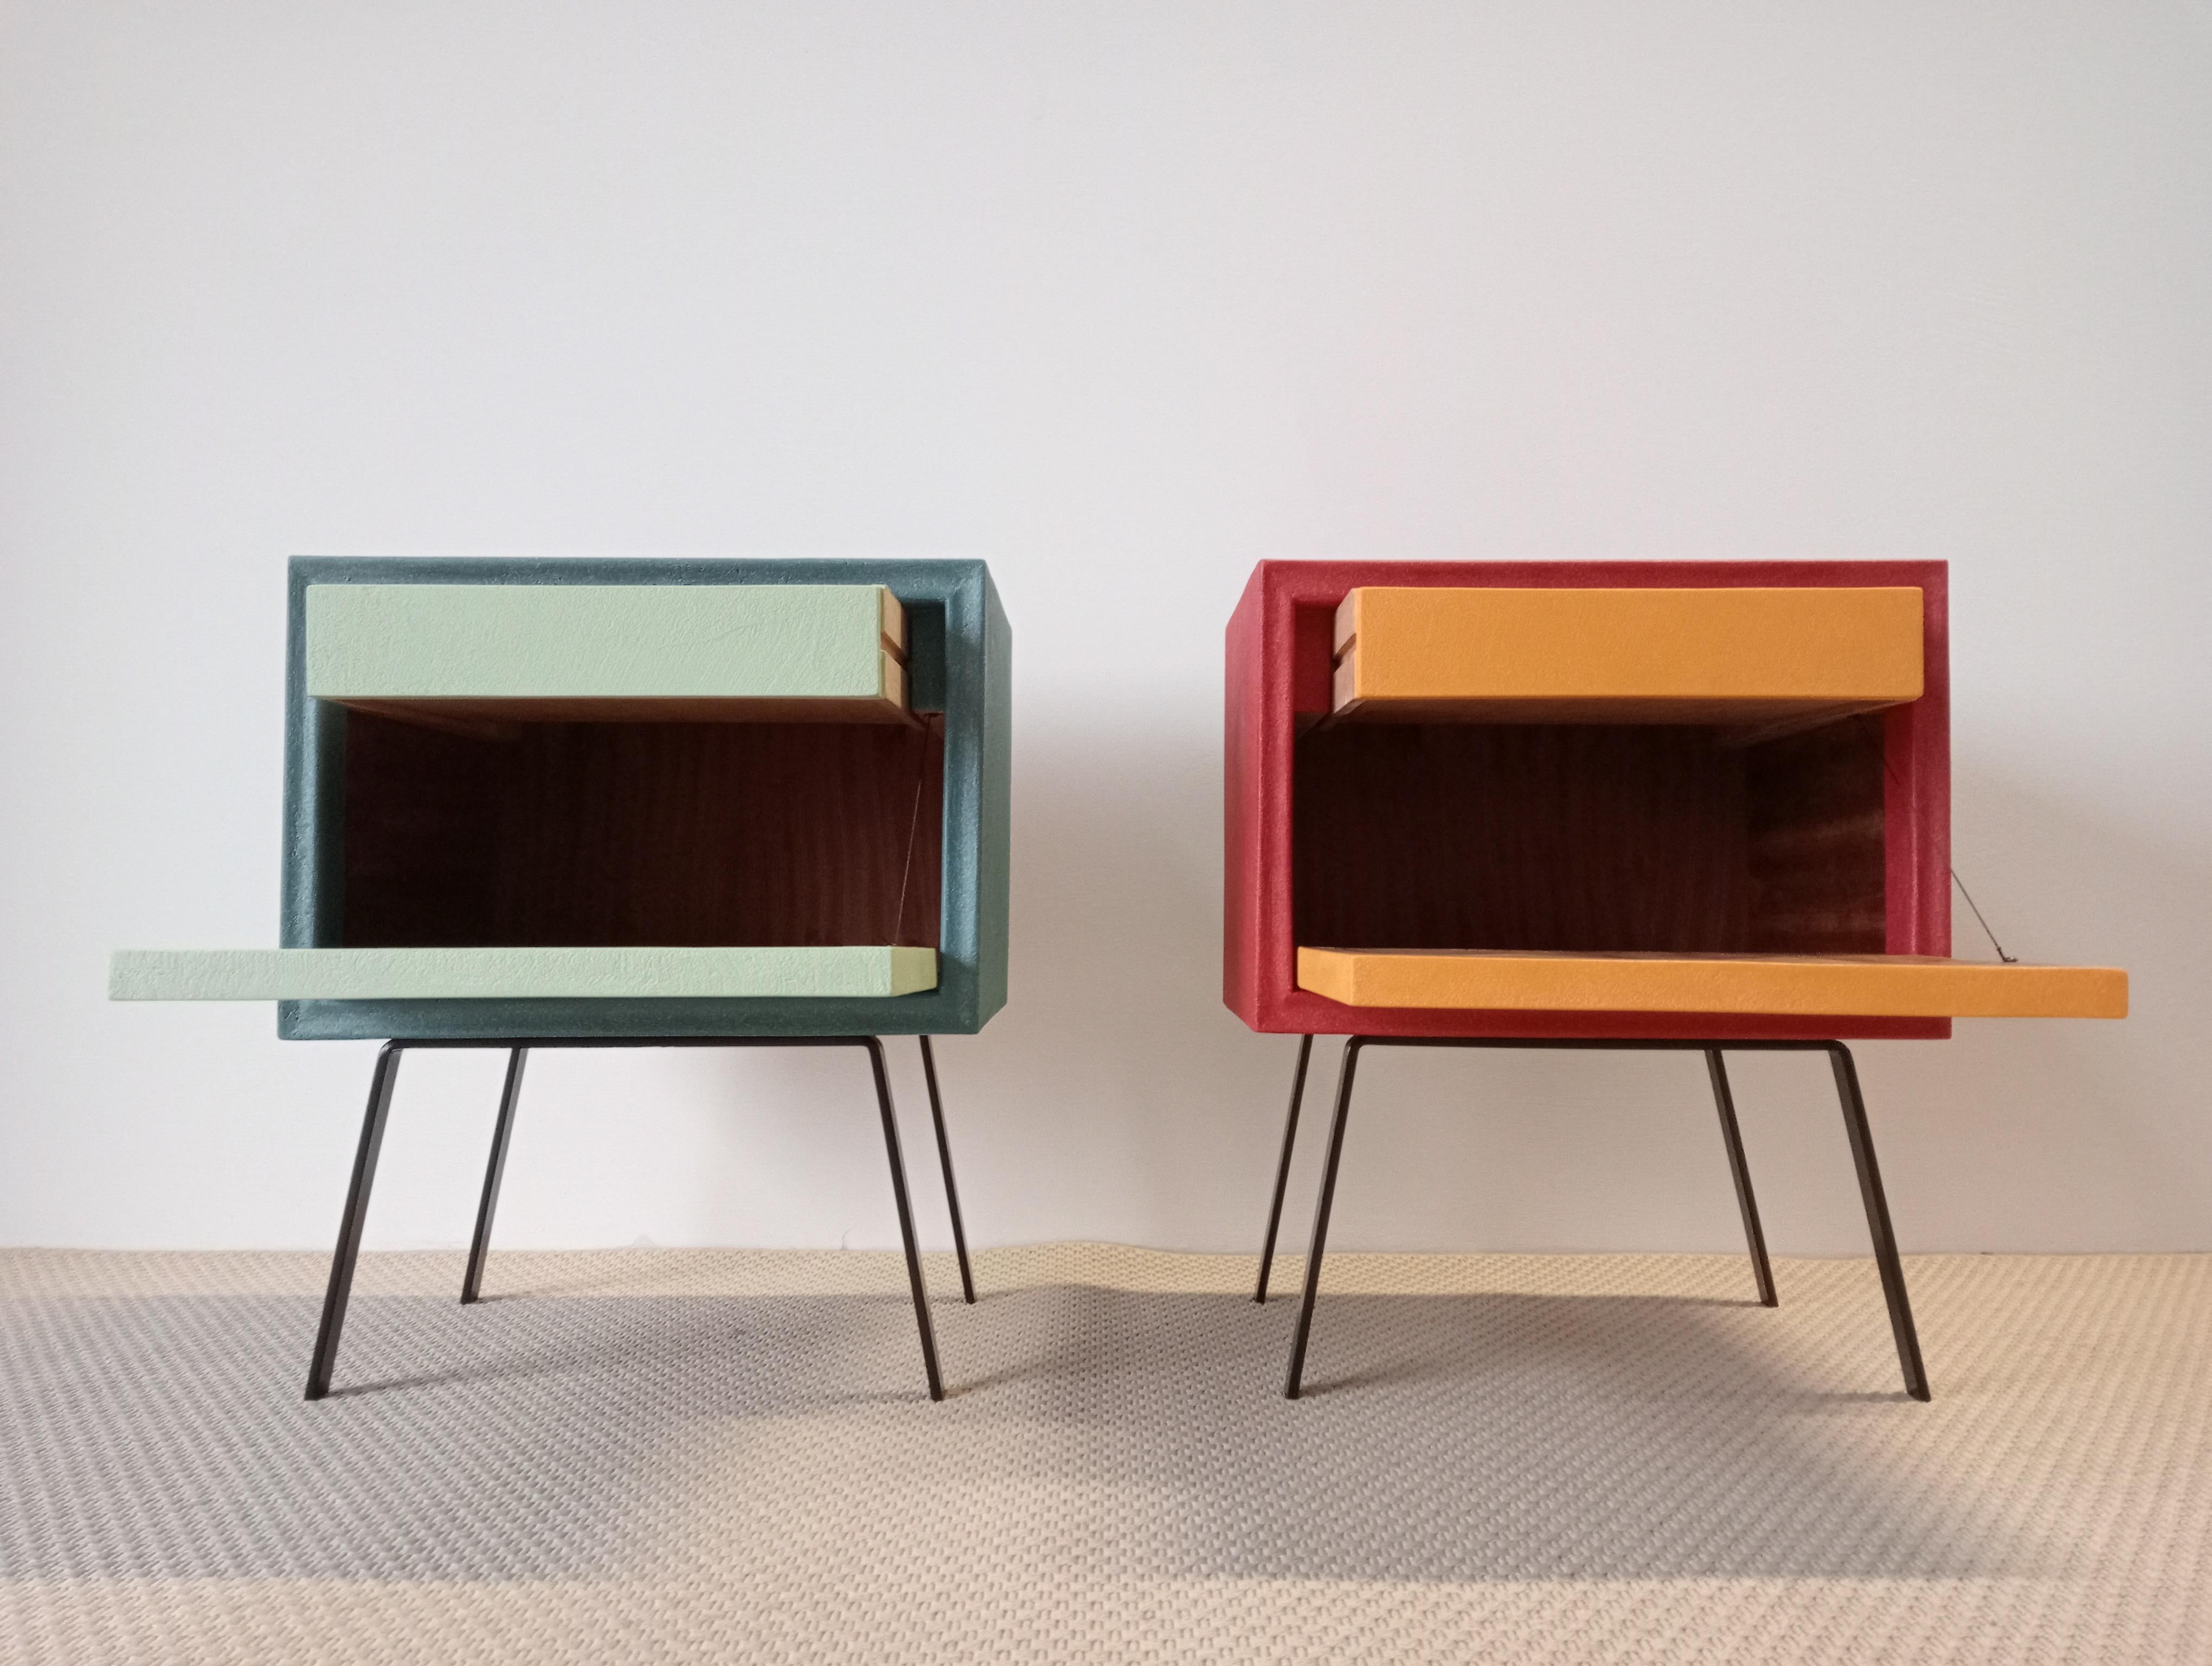 Italian Design Pair of Cabinets Contemporary Wood and coloured Resin Available In Good Condition For Sale In Budoia, IT